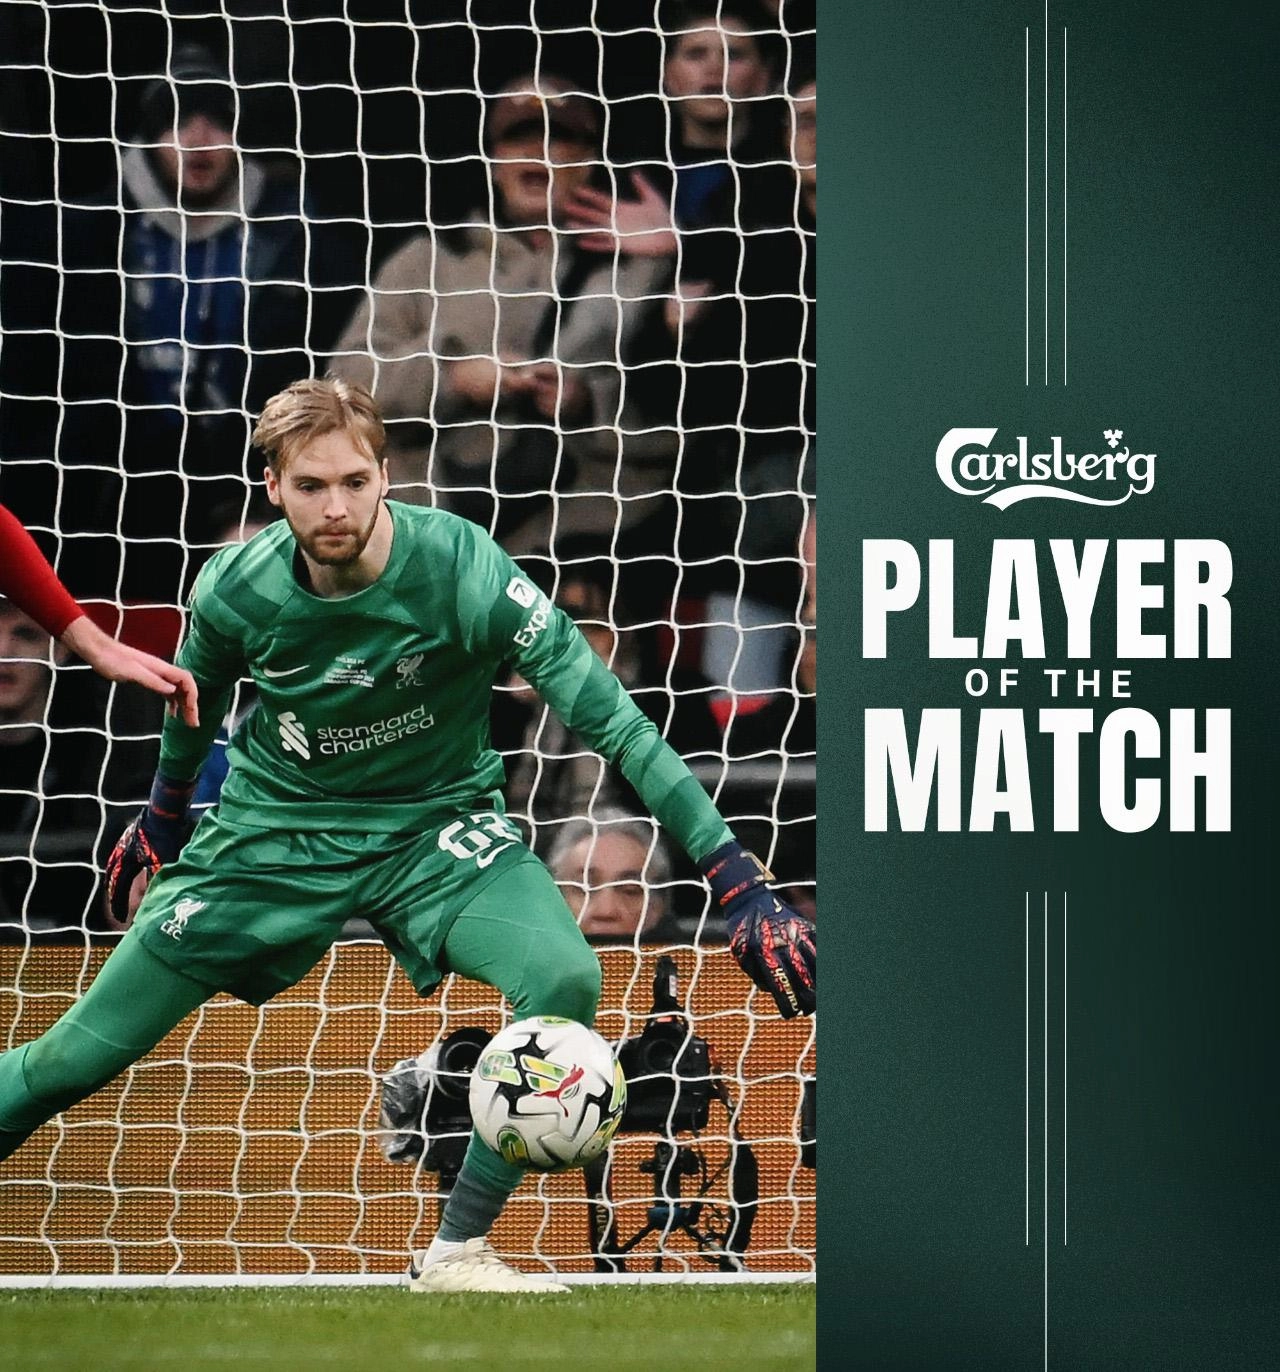 "In the big moments you have to step up and make saves" says Liverpool goalkeeper Caoimhin Kelleher as he discusses the importance of the win at Wembley